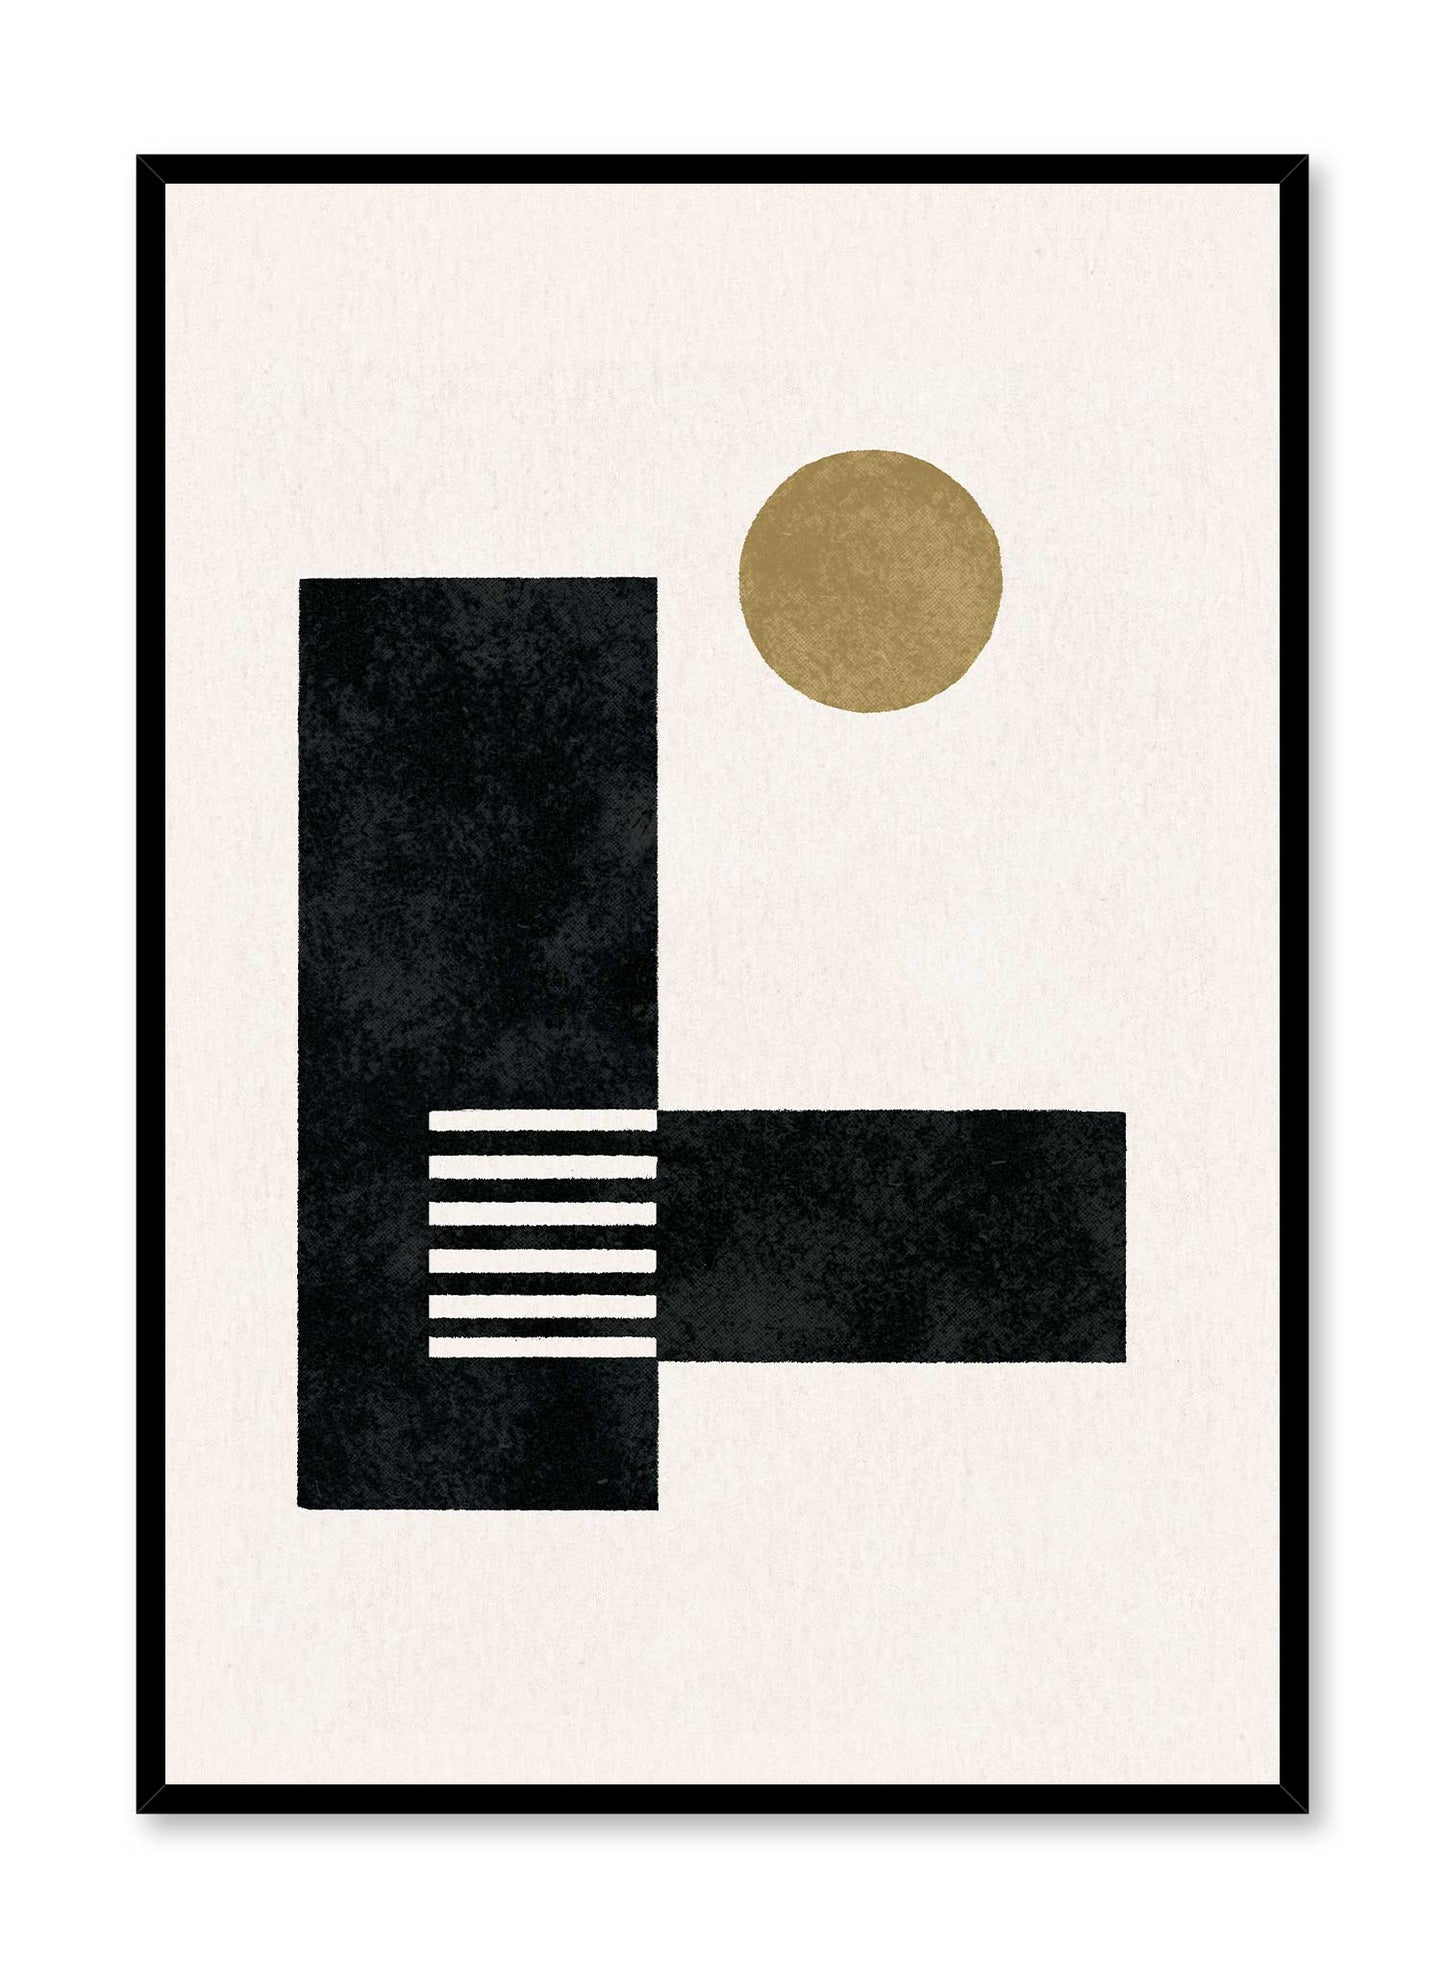 Noon is a minimalist abstract illustration of two black rectangles and a brown circle resembling a house and the sun by Opposite Wall.